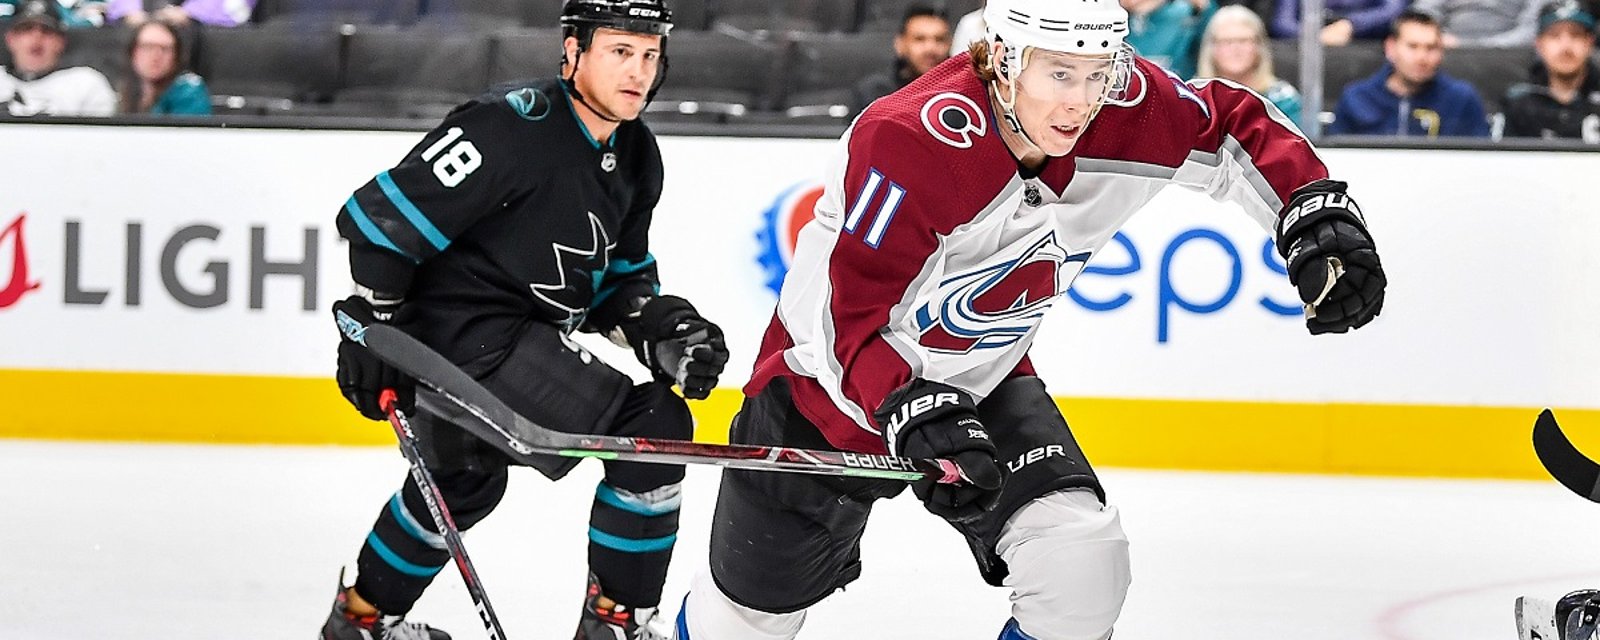 Two big line up updates for Game 6 between the Sharks and Avalanche.